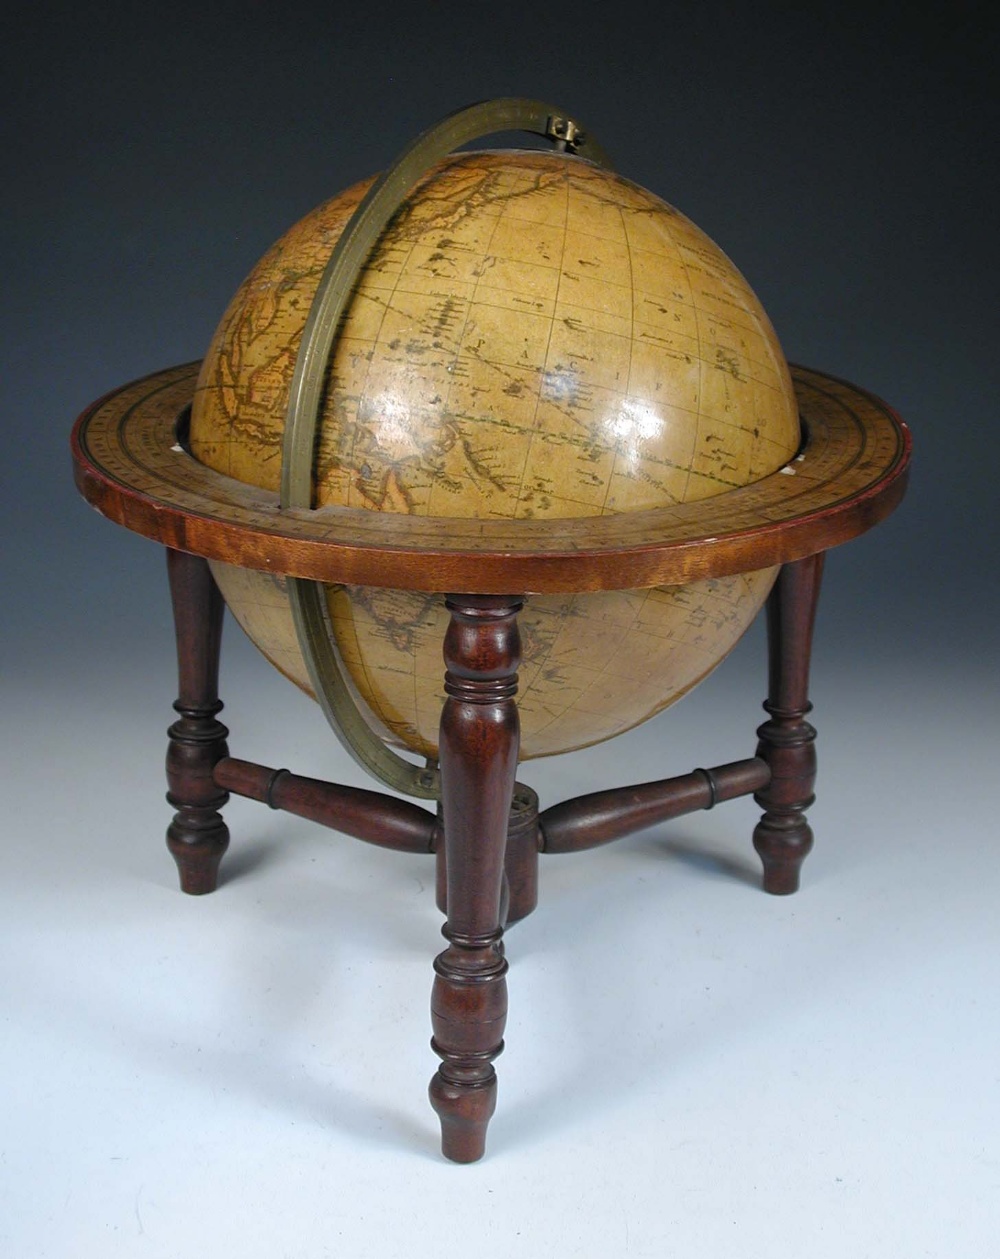 A Smith's Terrestial 10inch table Globe, 'containing all the most recent discoveries', varnished